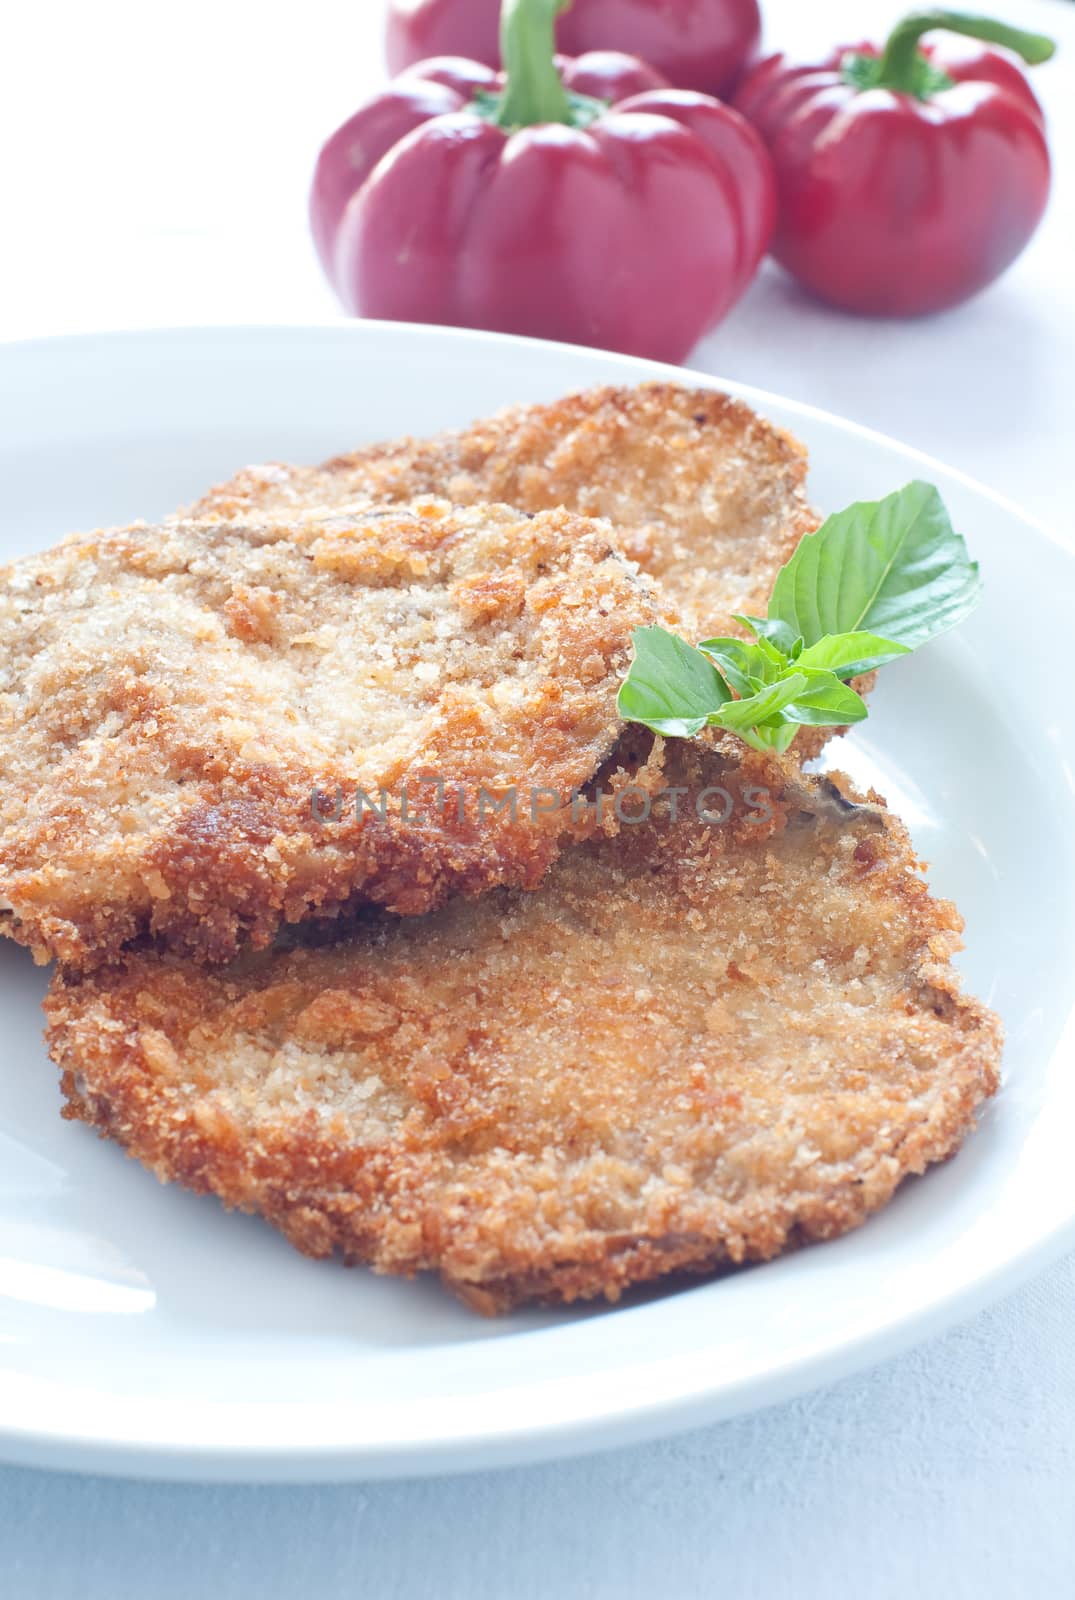 Eggplant slices breaded and fried by gringox